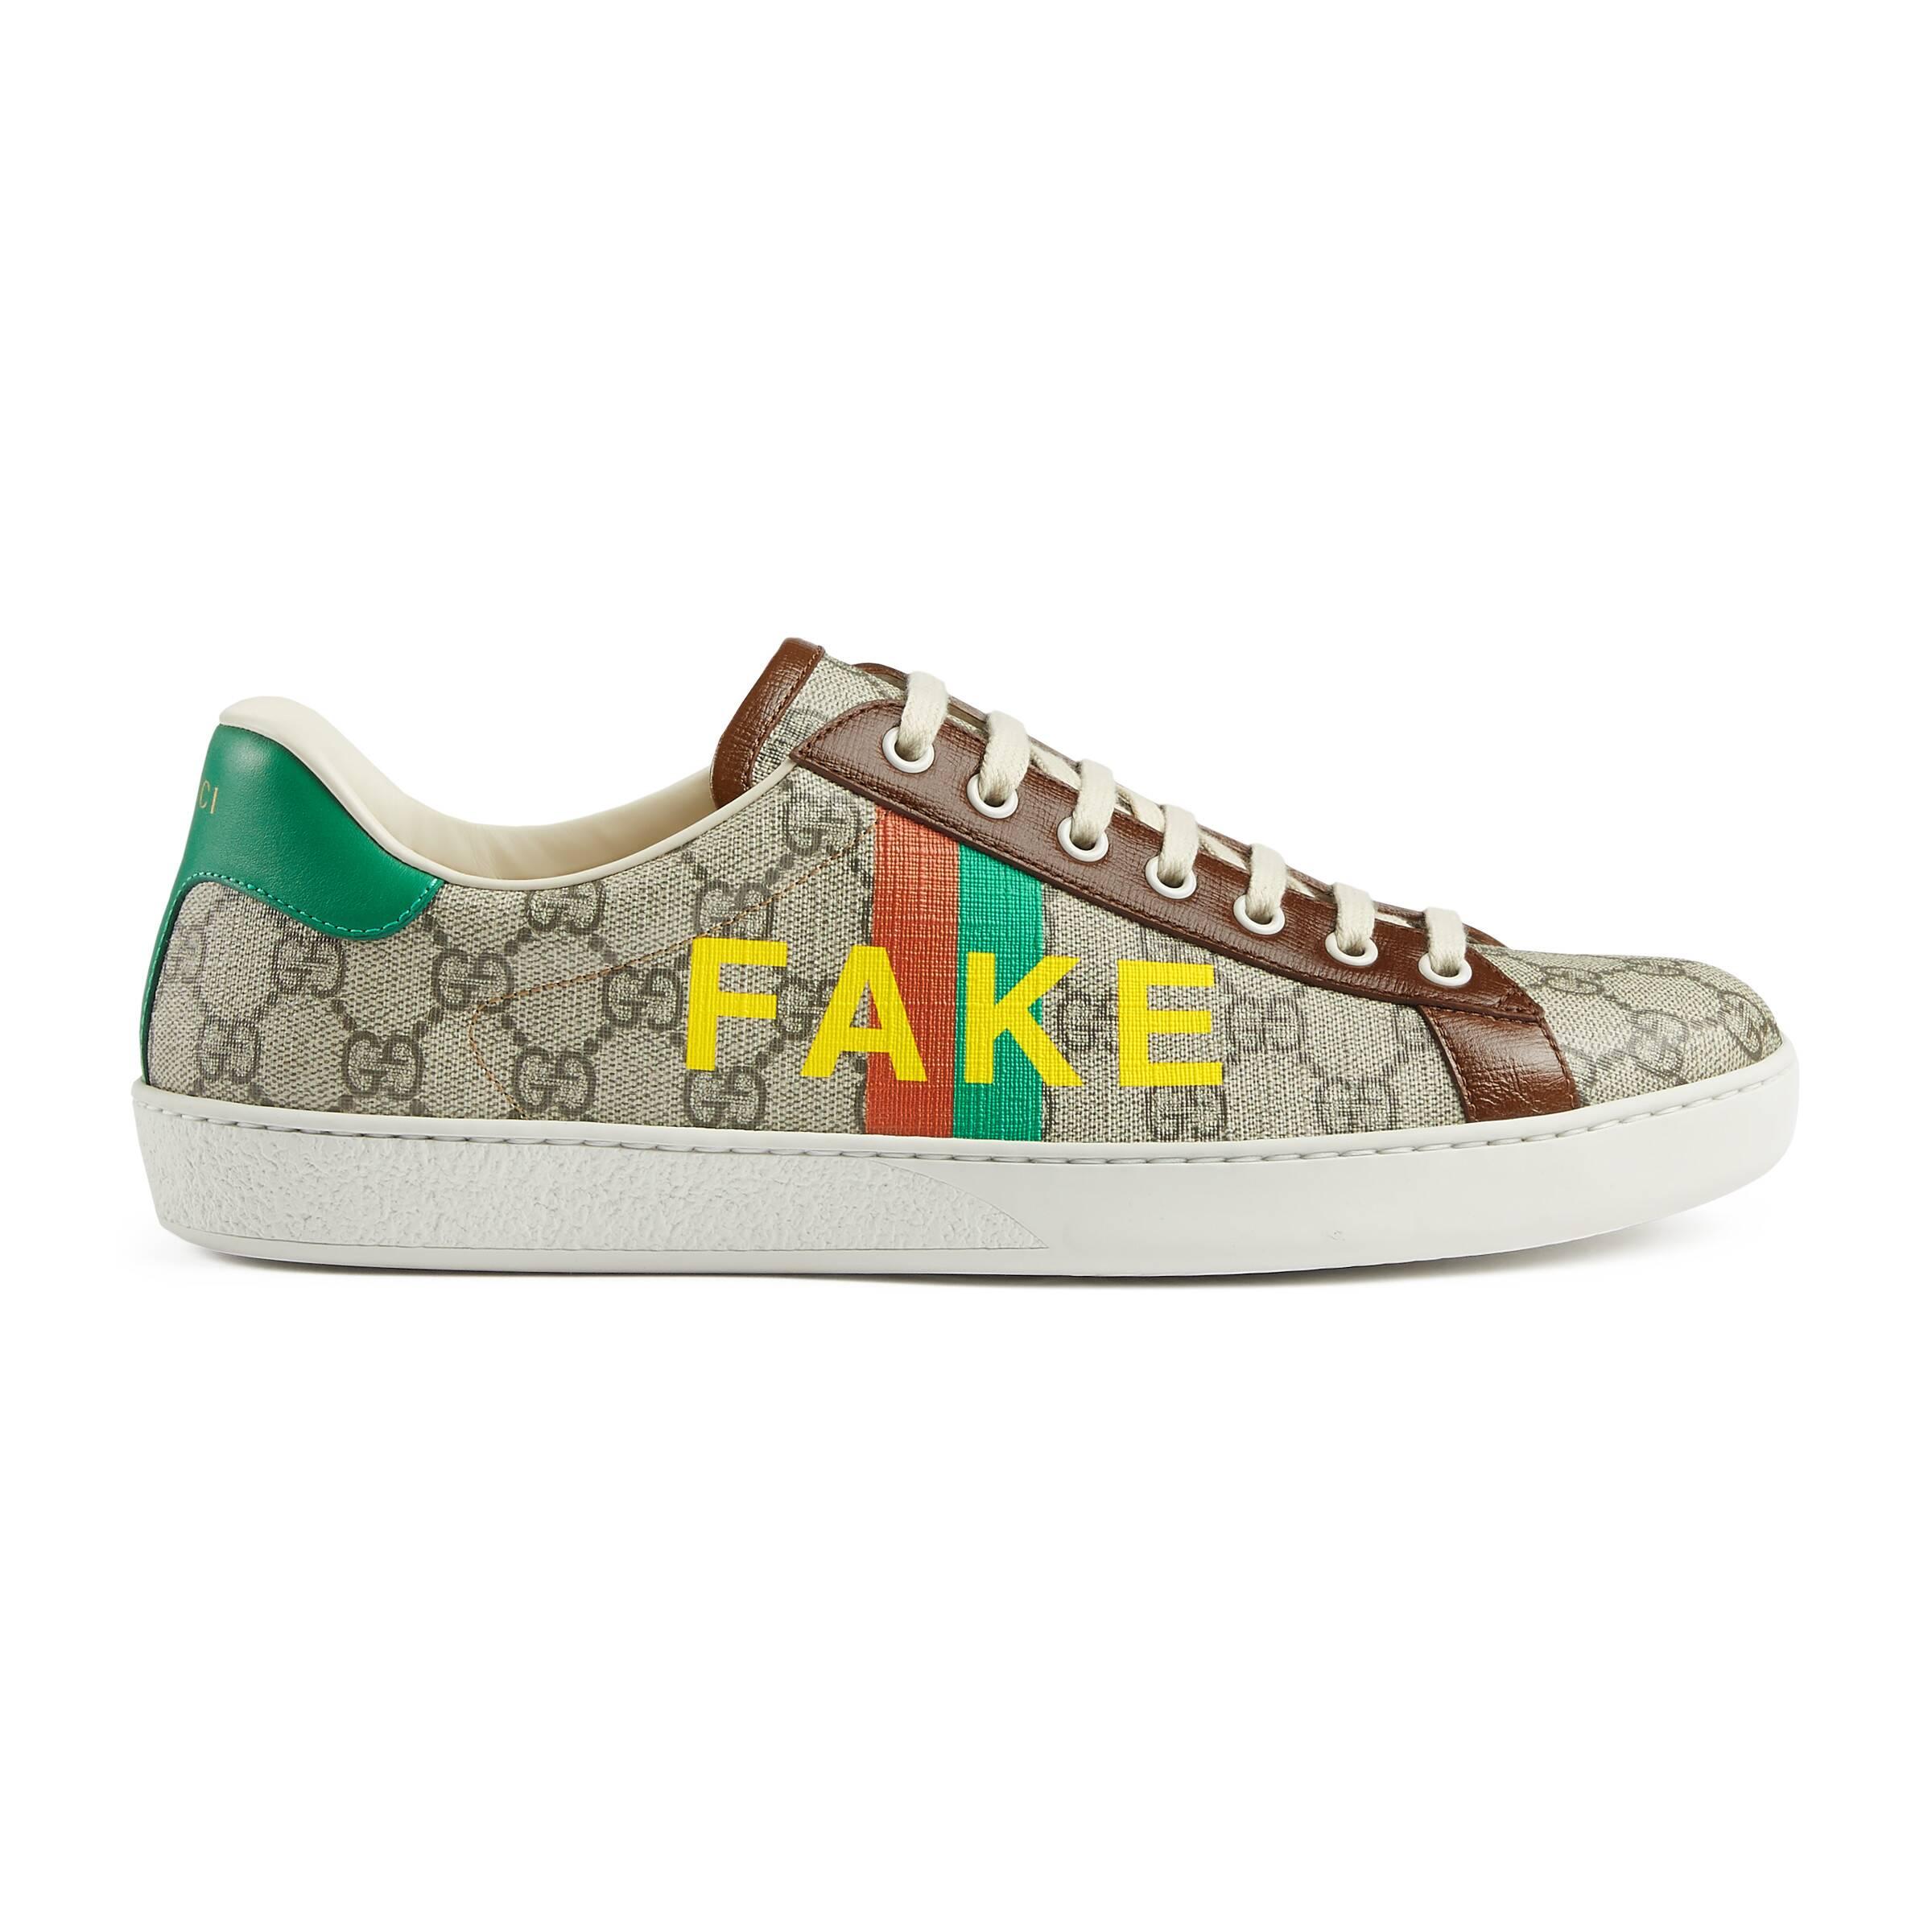 undskyldning Shipley Minearbejder Gucci Canvas 'fake/not' Print Ace Sneaker in Beige (Natural) - Save 36% -  Lyst